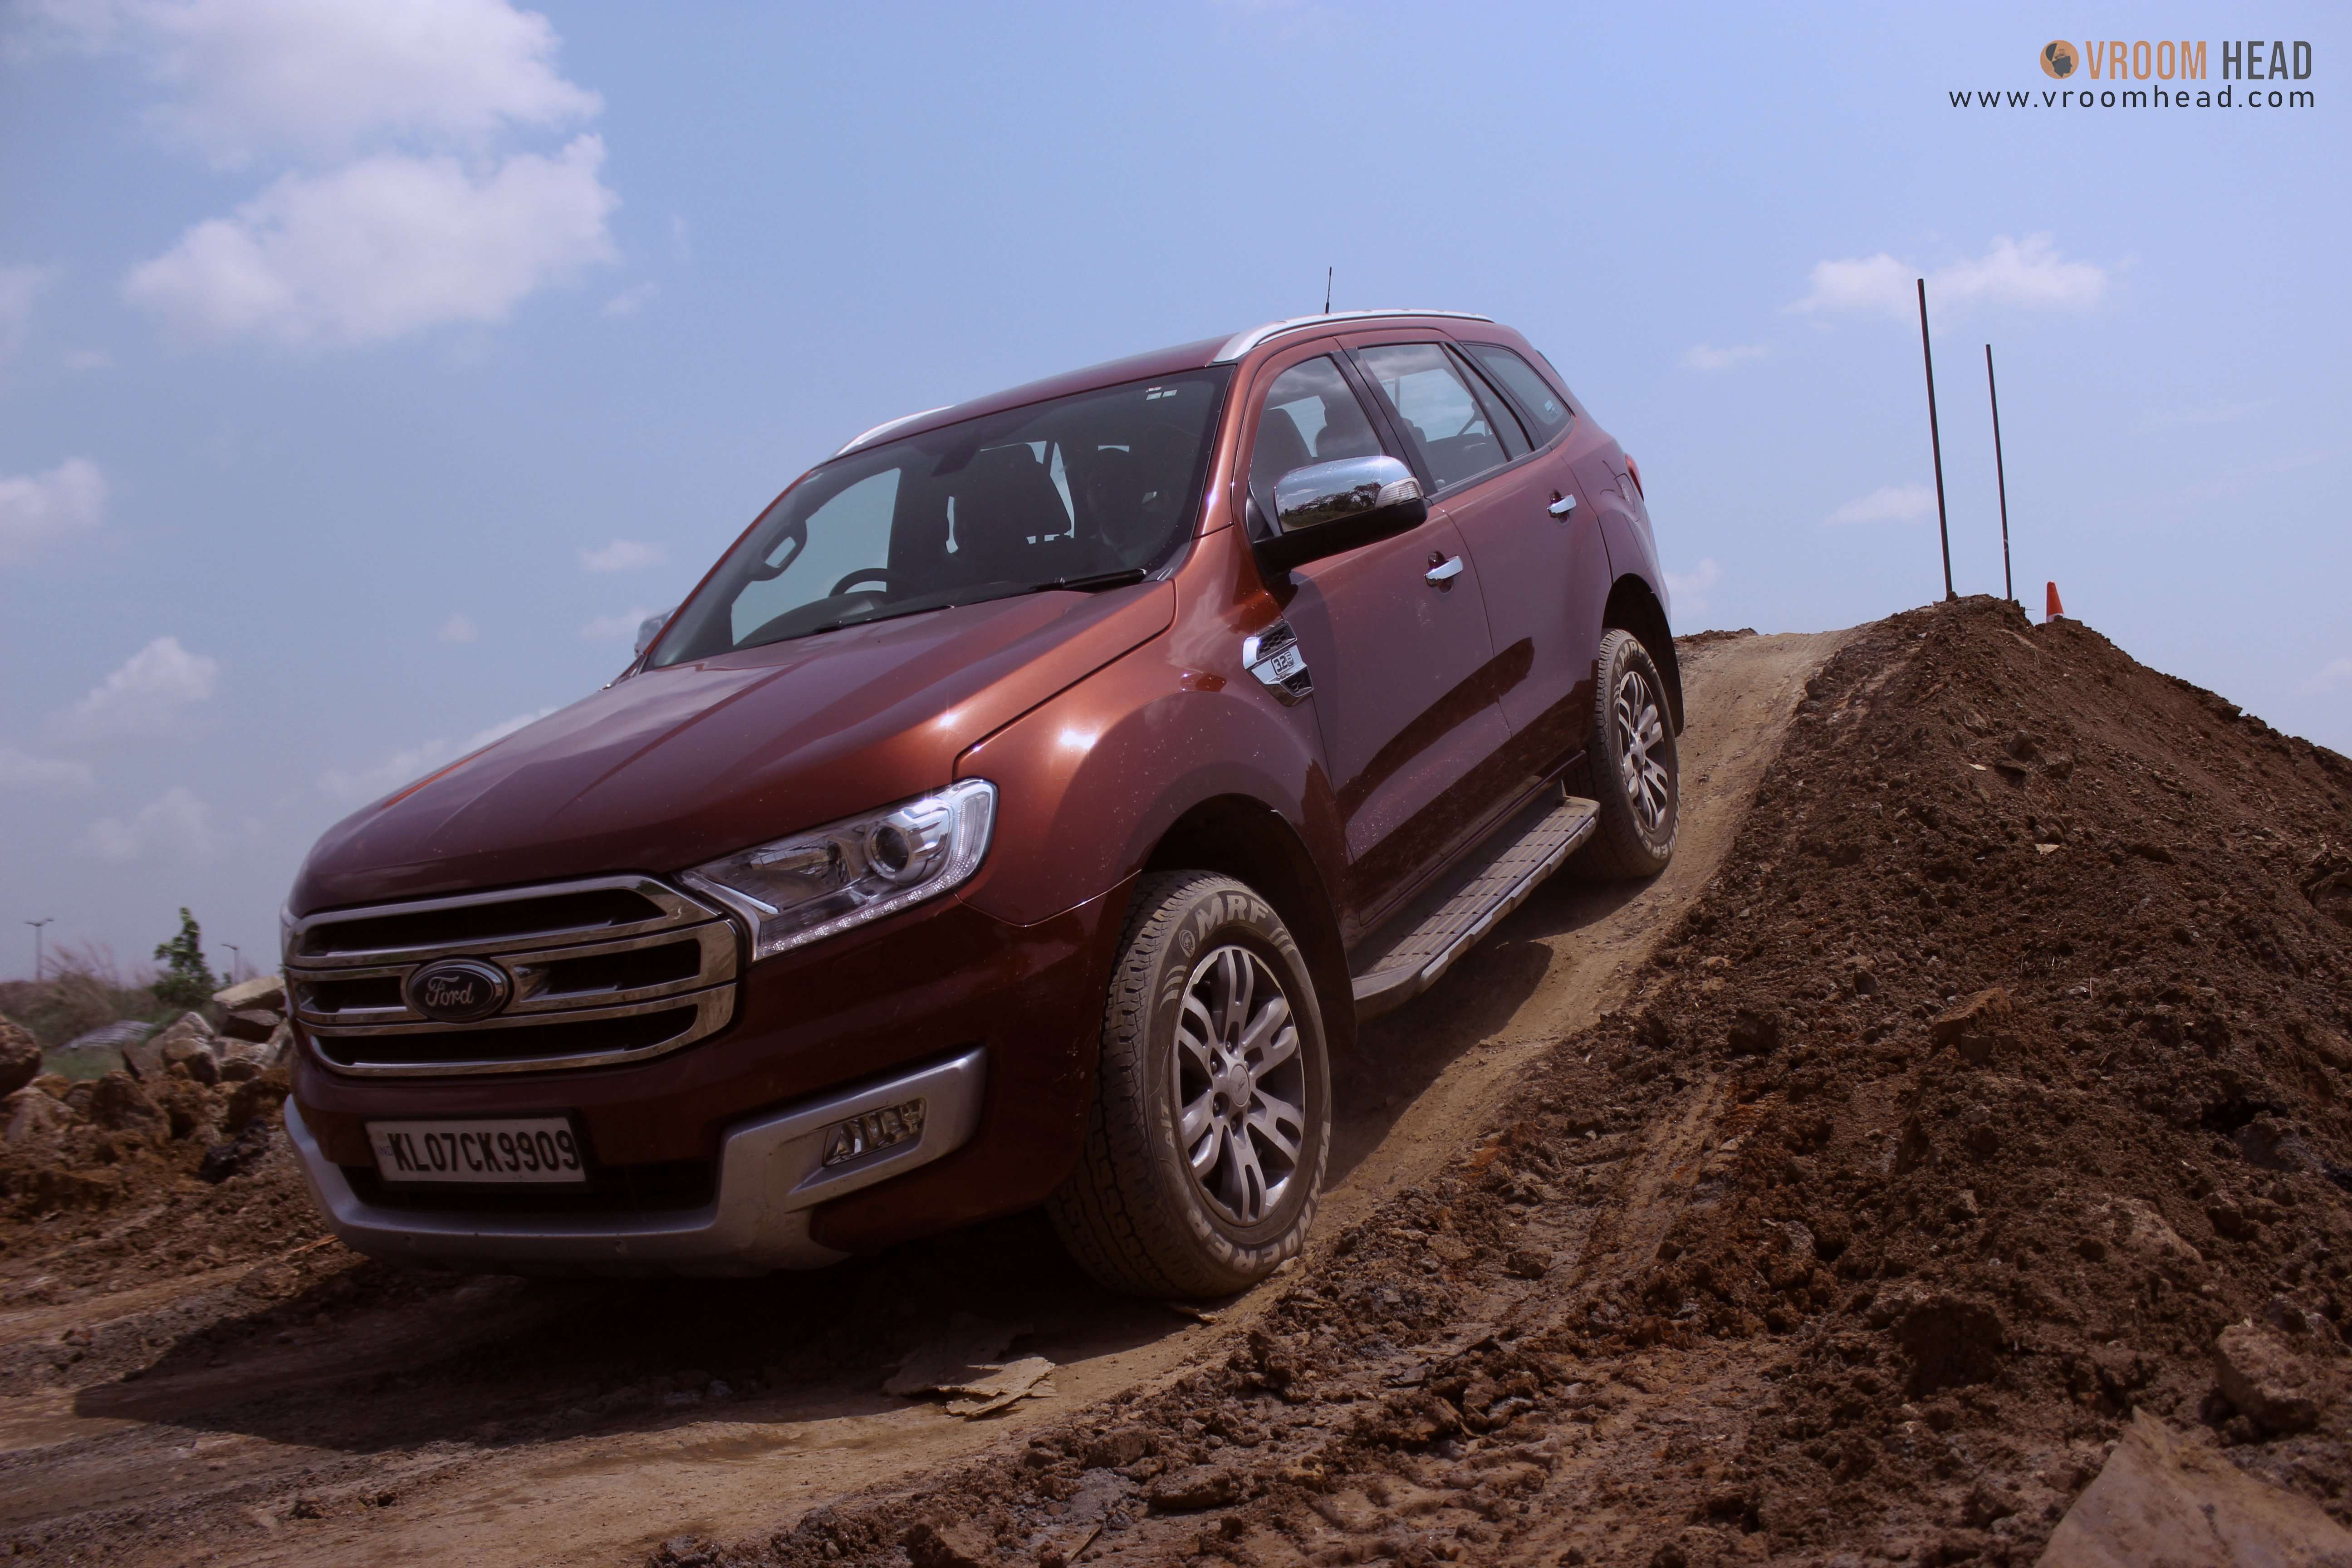 Ford Endeavour price, Ford Endeavour facelift Ford Endeavour 2019